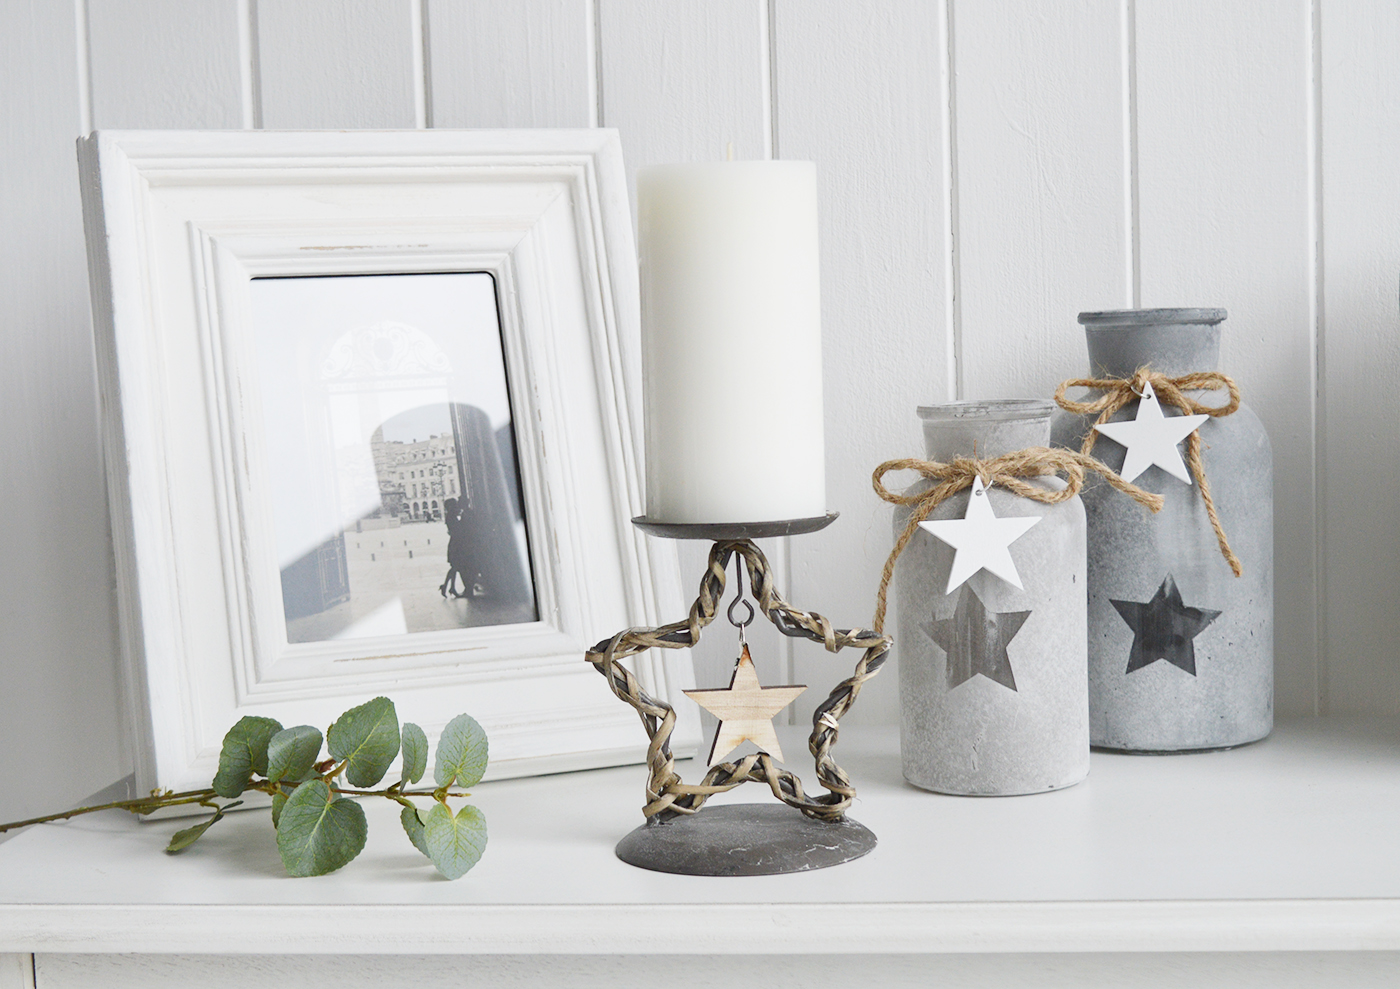 Star Candle holder for pillar candles. New England style home interiors and furniture from The White Lighthouse